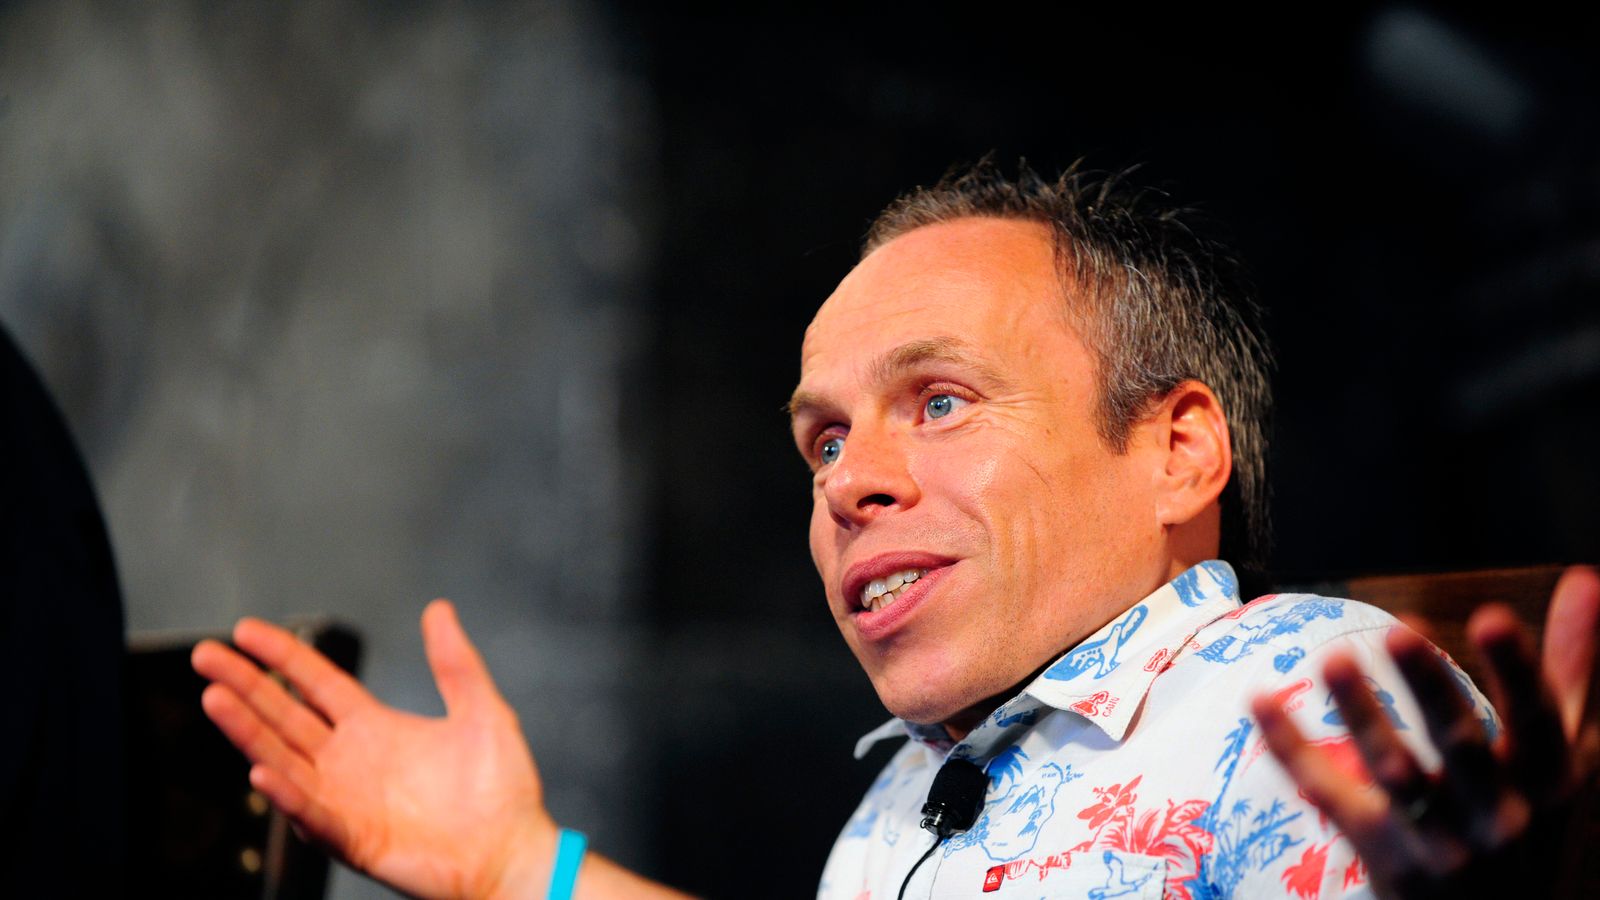 Actor Warwick Davis talks during a media preview of The Wizarding World of Harry Potter-Diagon Alley at the Universal Orlando Resort in Orlando, Florida June 19, 2014. The new attraction, which opens to the public on July 8, expands the original Harry Potter world, which opened in 2010 and is modeled after Hogsmeade Village, which is located near the Hogwarts School of Witchcraft and Wizardry where the series' leading character Harry Potter begins his magical adventures. REUTERS/David Manning  (UNITED STATES - Tags: ENTERTAINMENT BUSINESS)